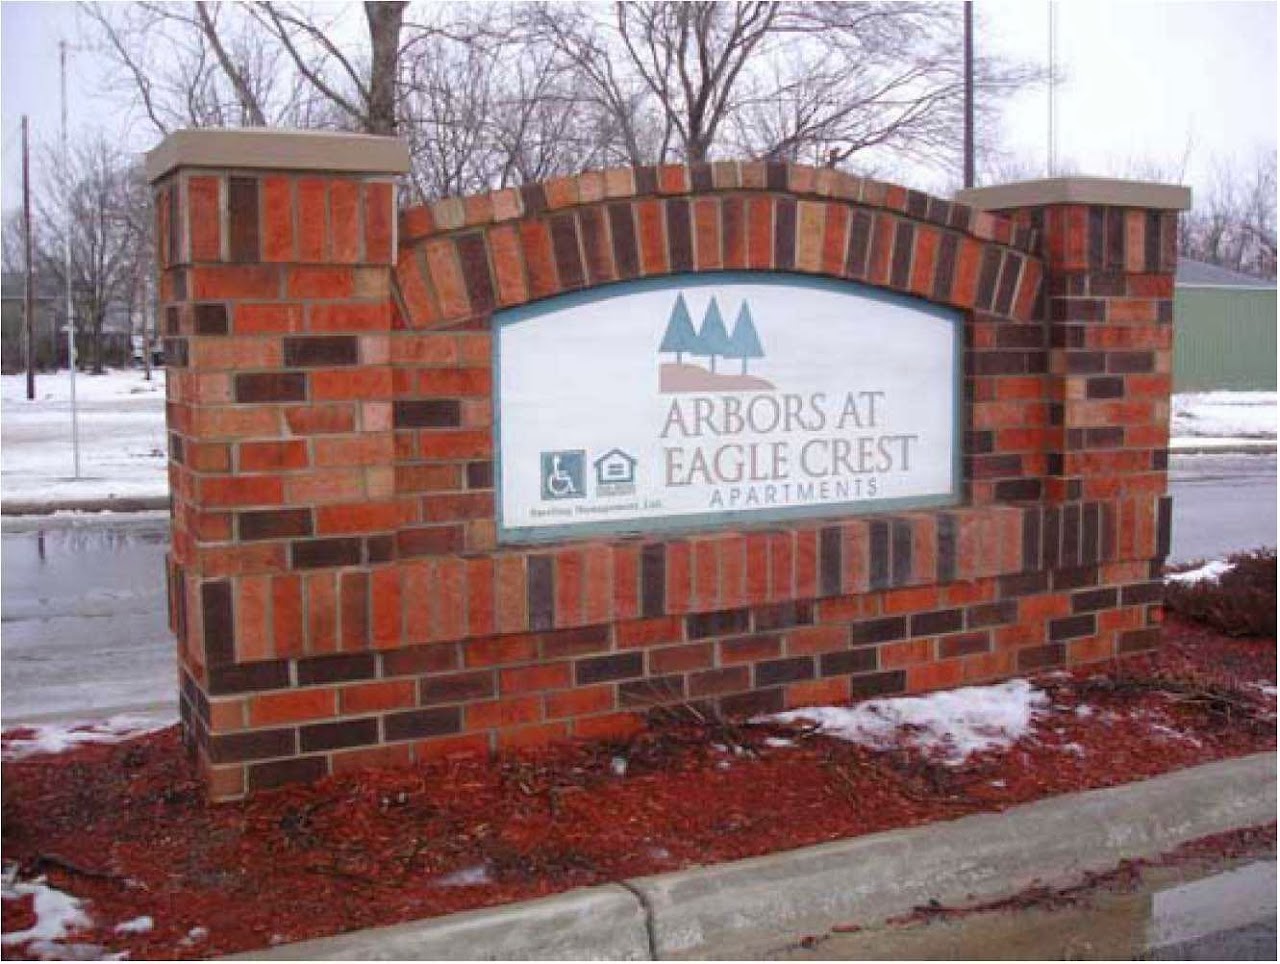 Photo of ARBORS AT EAGLE CREST I. Affordable housing located at 5100 N EAGLE CRST MT PLEASANT, MI 48858